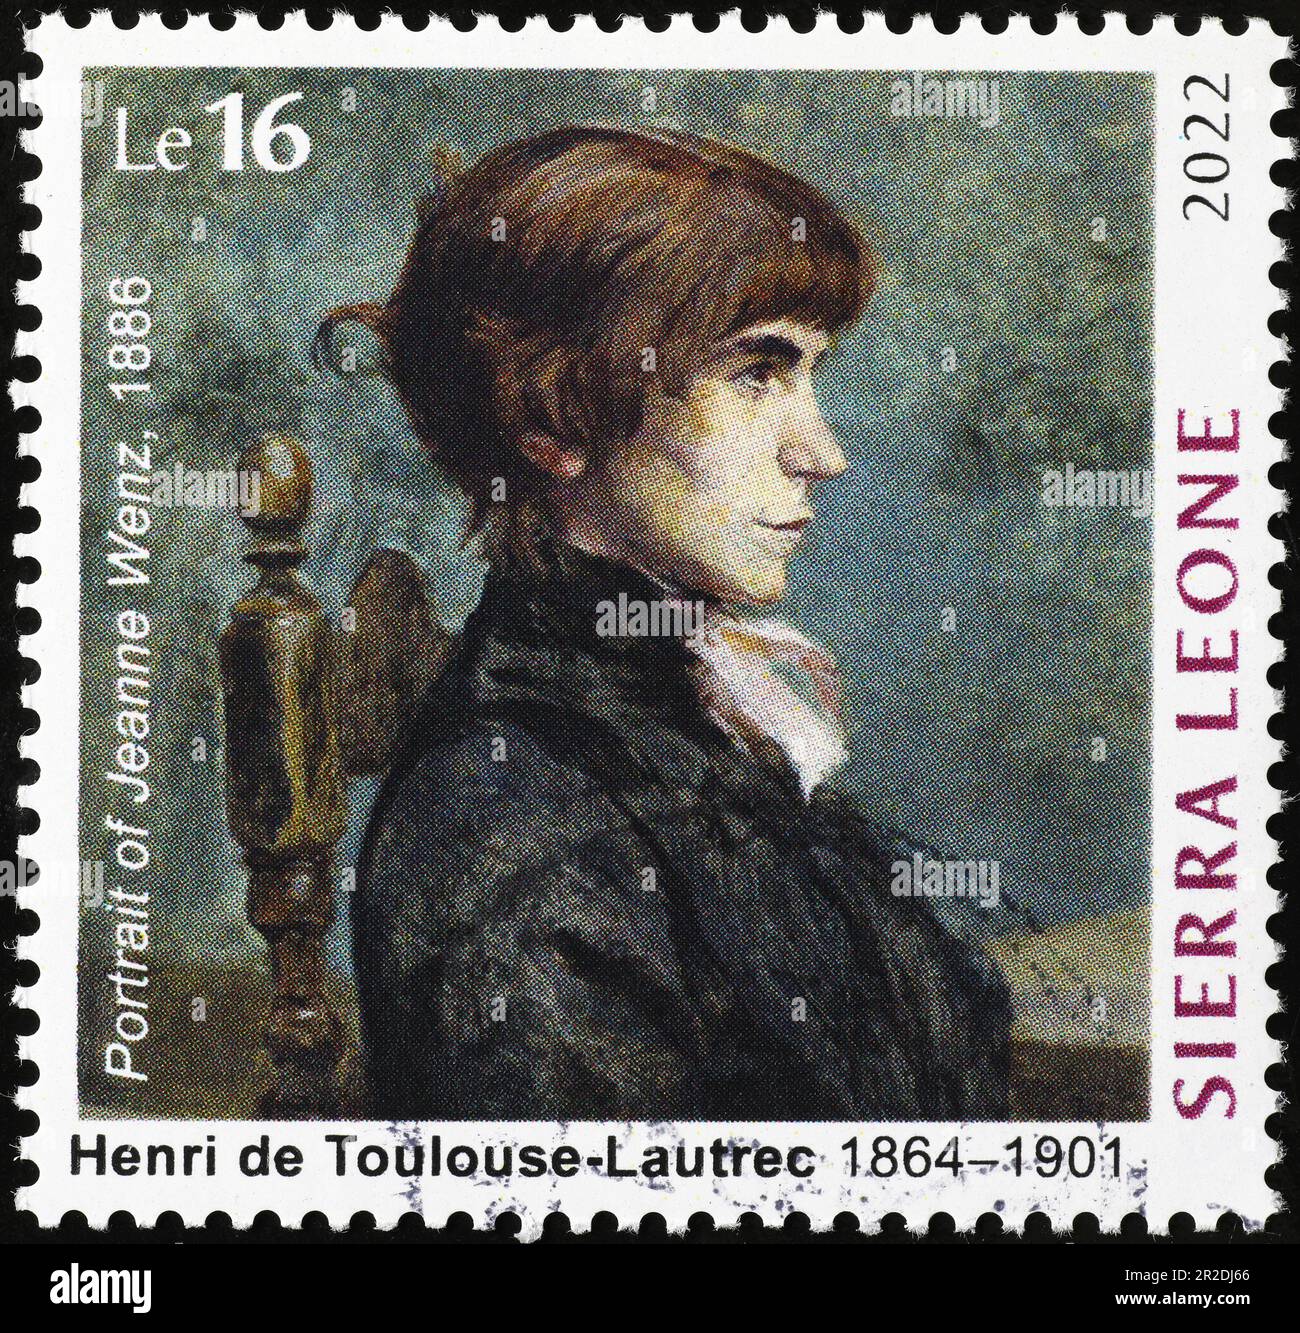 Portrait of Joanne Wenz by Toulouse-Lautrec on postage stamp Stock Photo